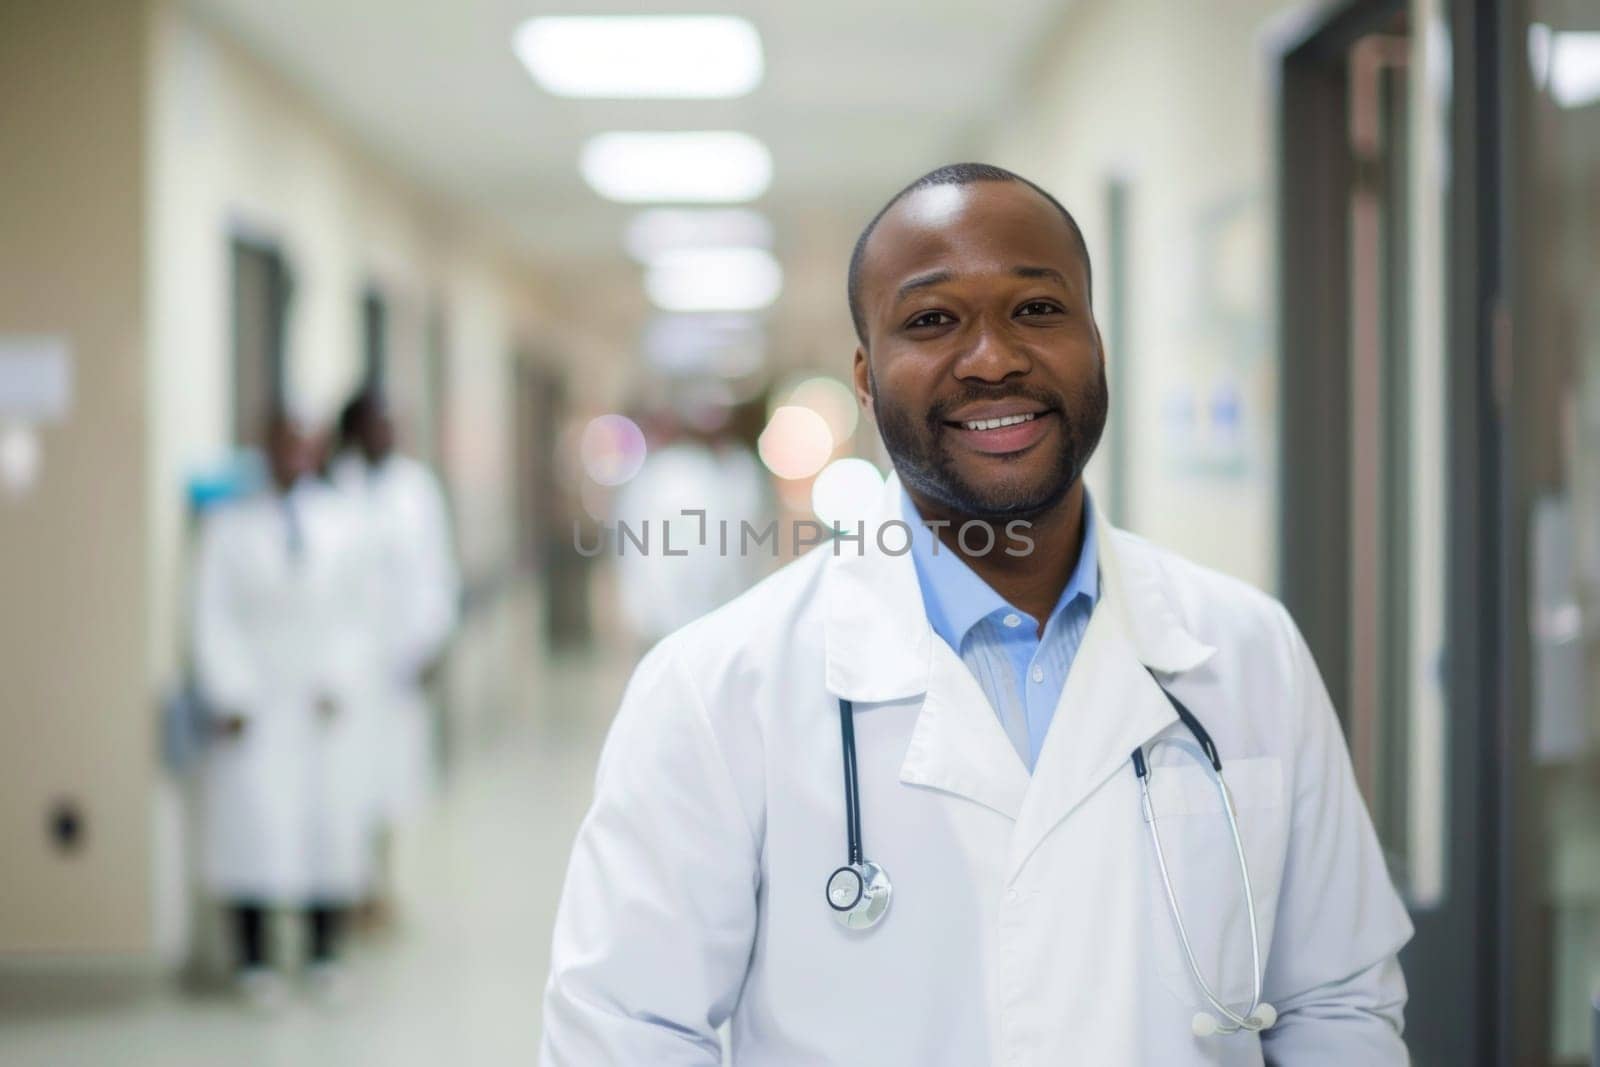 Black smiling doctor in a hospital hallway against the background of other blurred doctors by papatonic